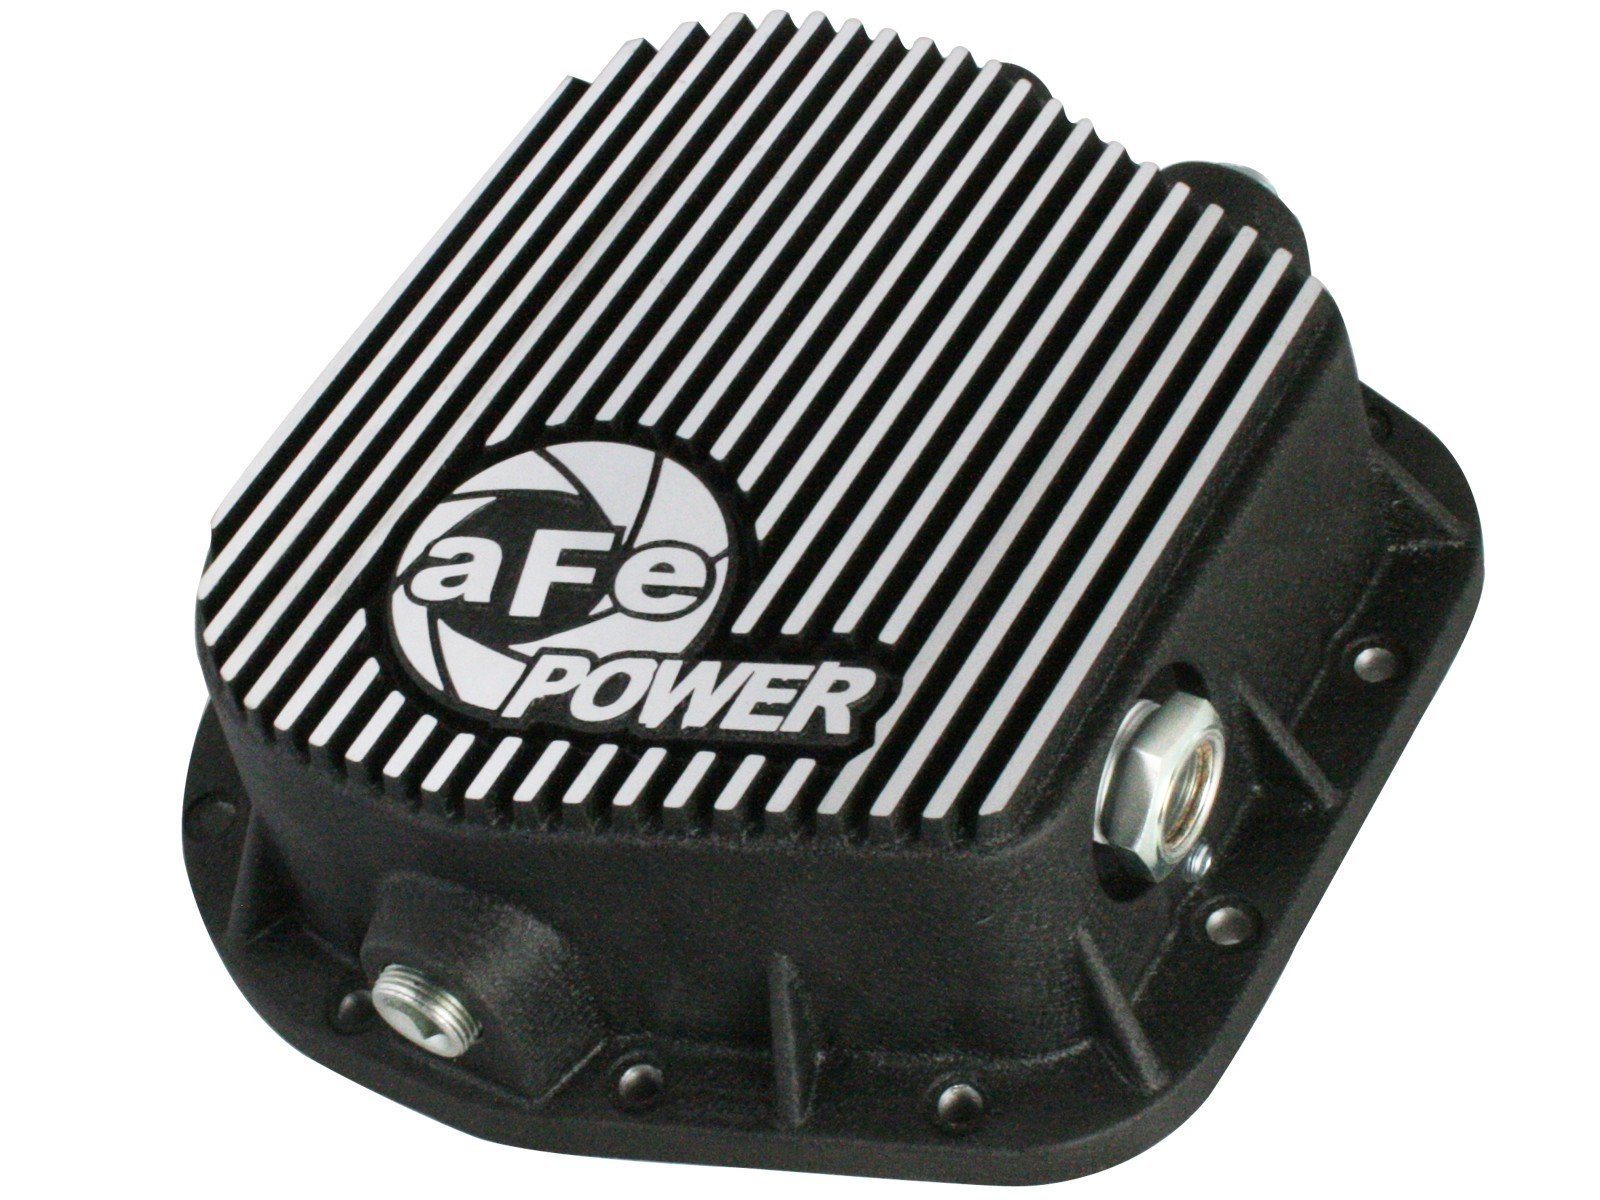 '97-03 Ford F150/ Ford Raptor Rear Differential Cover with Ford 9.75 rear axle AFE Power display